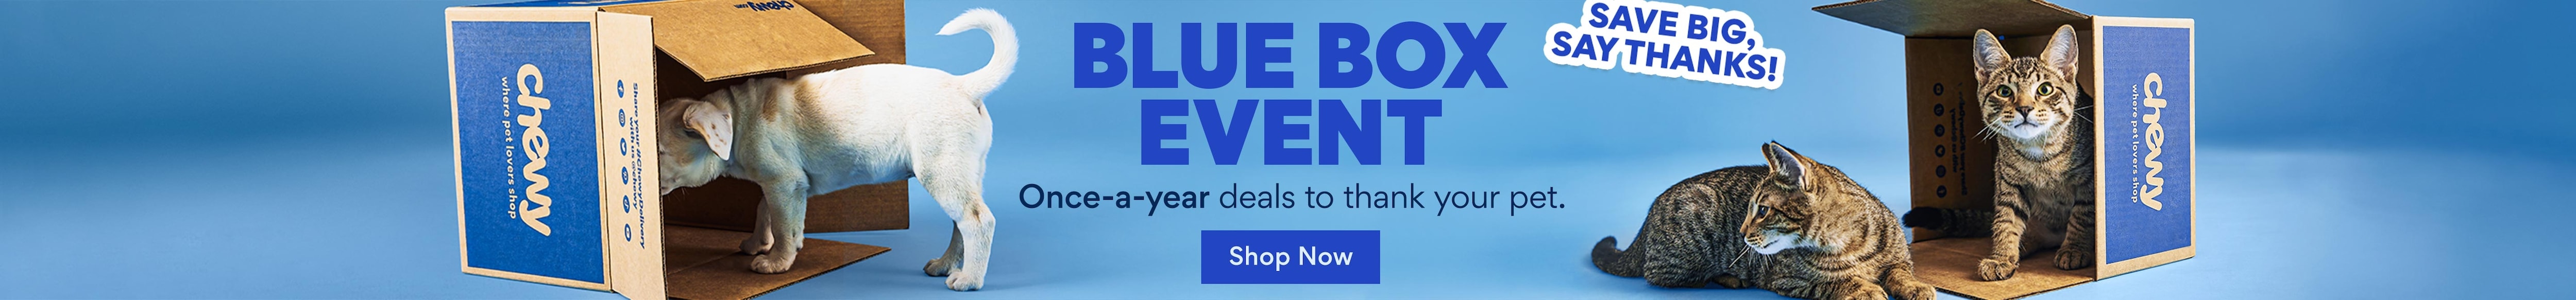 blue box event. once a year deals to thank your pet. shop now